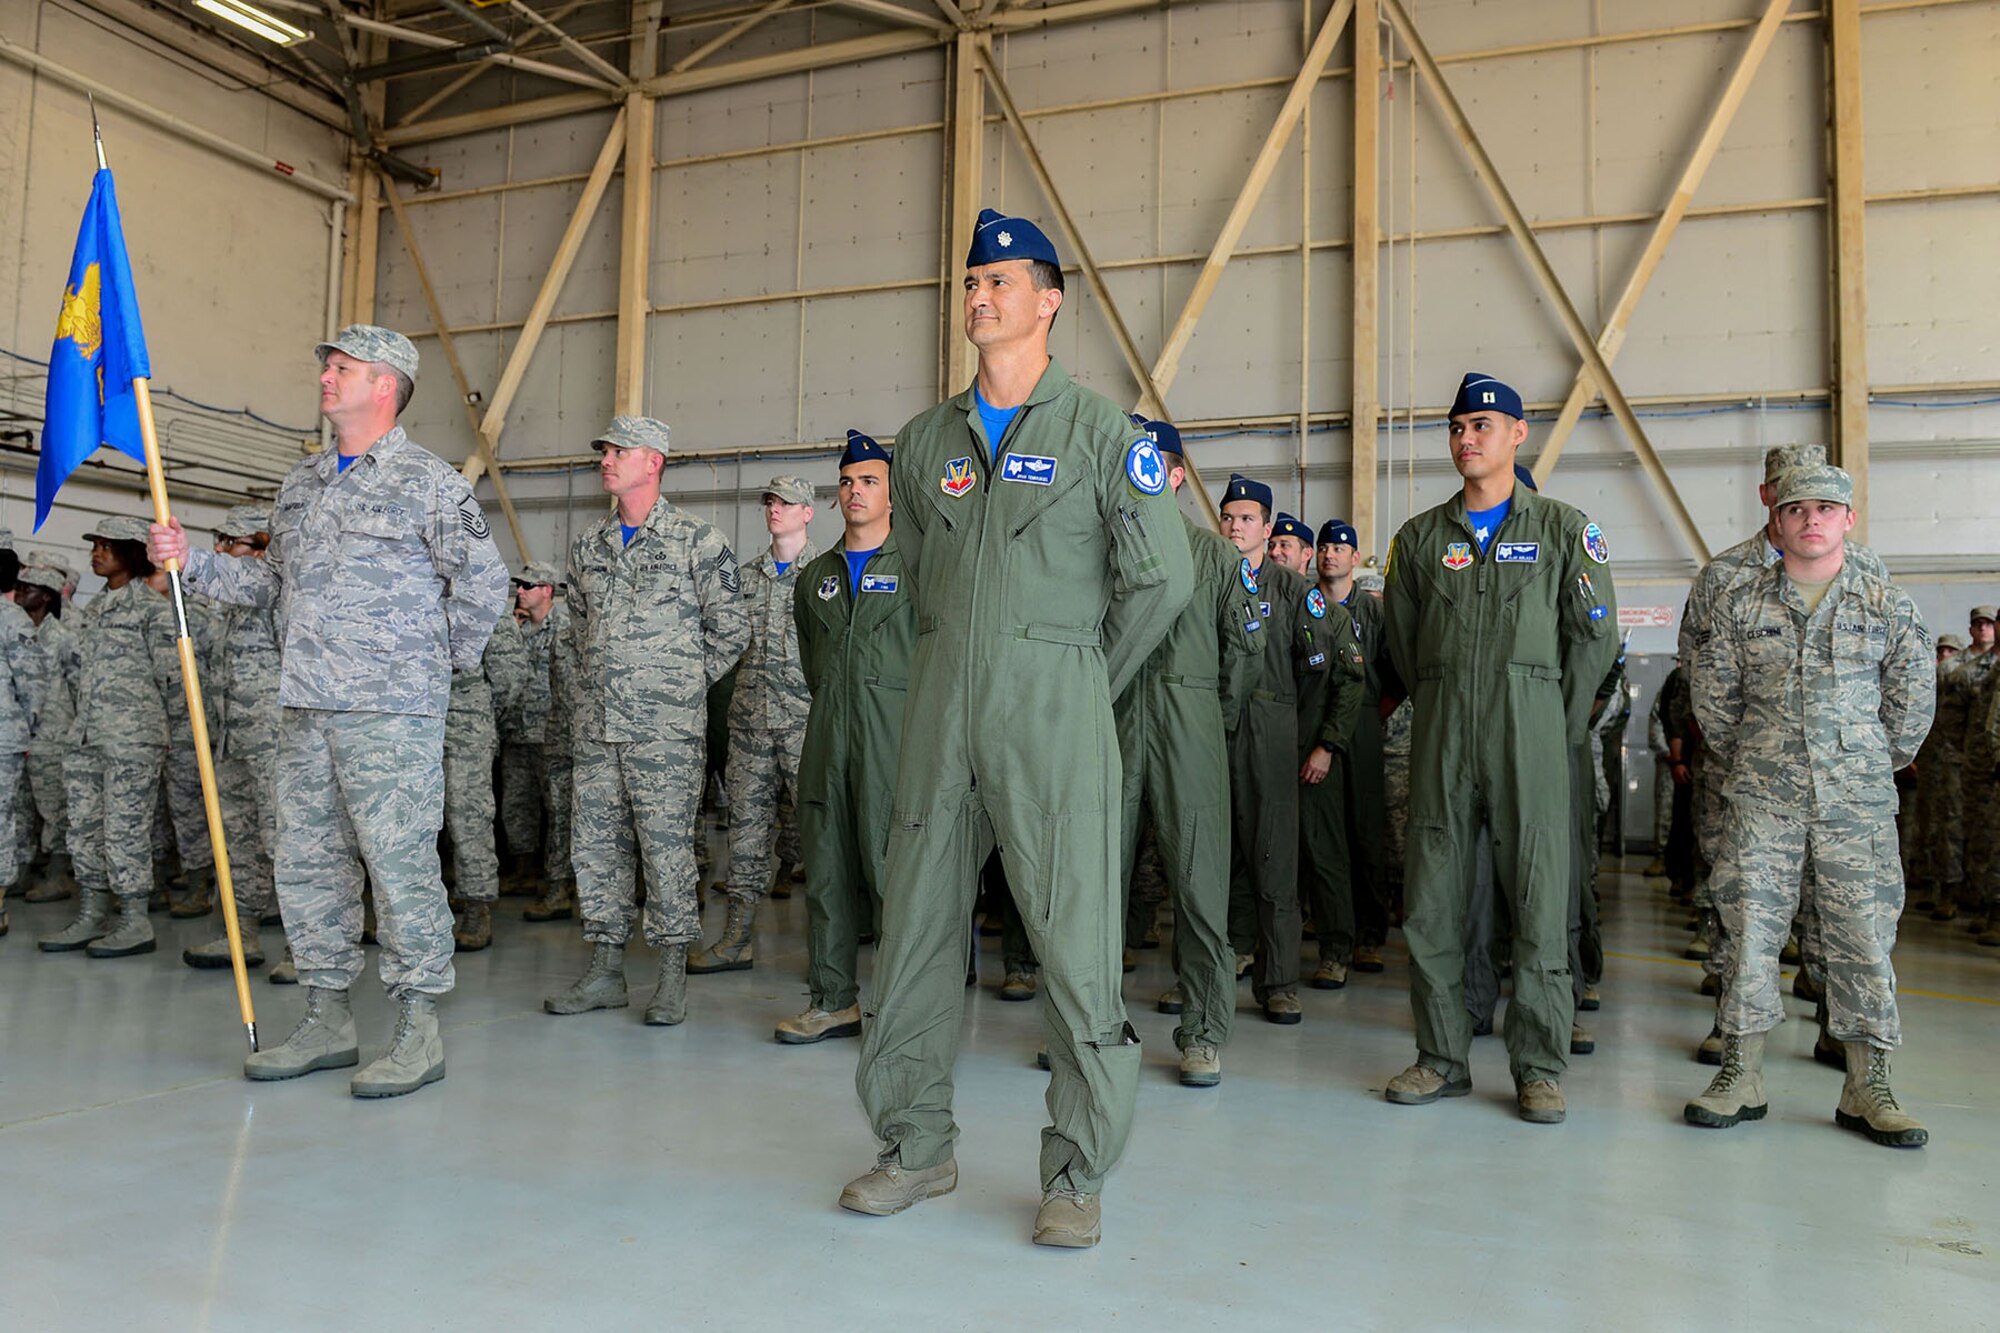 U.S. Air Force Lt. Col. Brian Tenbrunsel, the commander of the 157th Fighter Squadron, assumes his place in front of his squadron during a change of command ceremony at McEntire Joint National Guard Base, S.C., May 14, 2016. Lt. Col. Akshai Gandhi assumes the position as vice commander of the 169th Fighter Wing and relinquishes command of the 157th Fighter Squadron to Lt. Col. Brian Tenbrunsel. (U.S. Air National Guard photo by Airman 1st Class Megan Floyd)